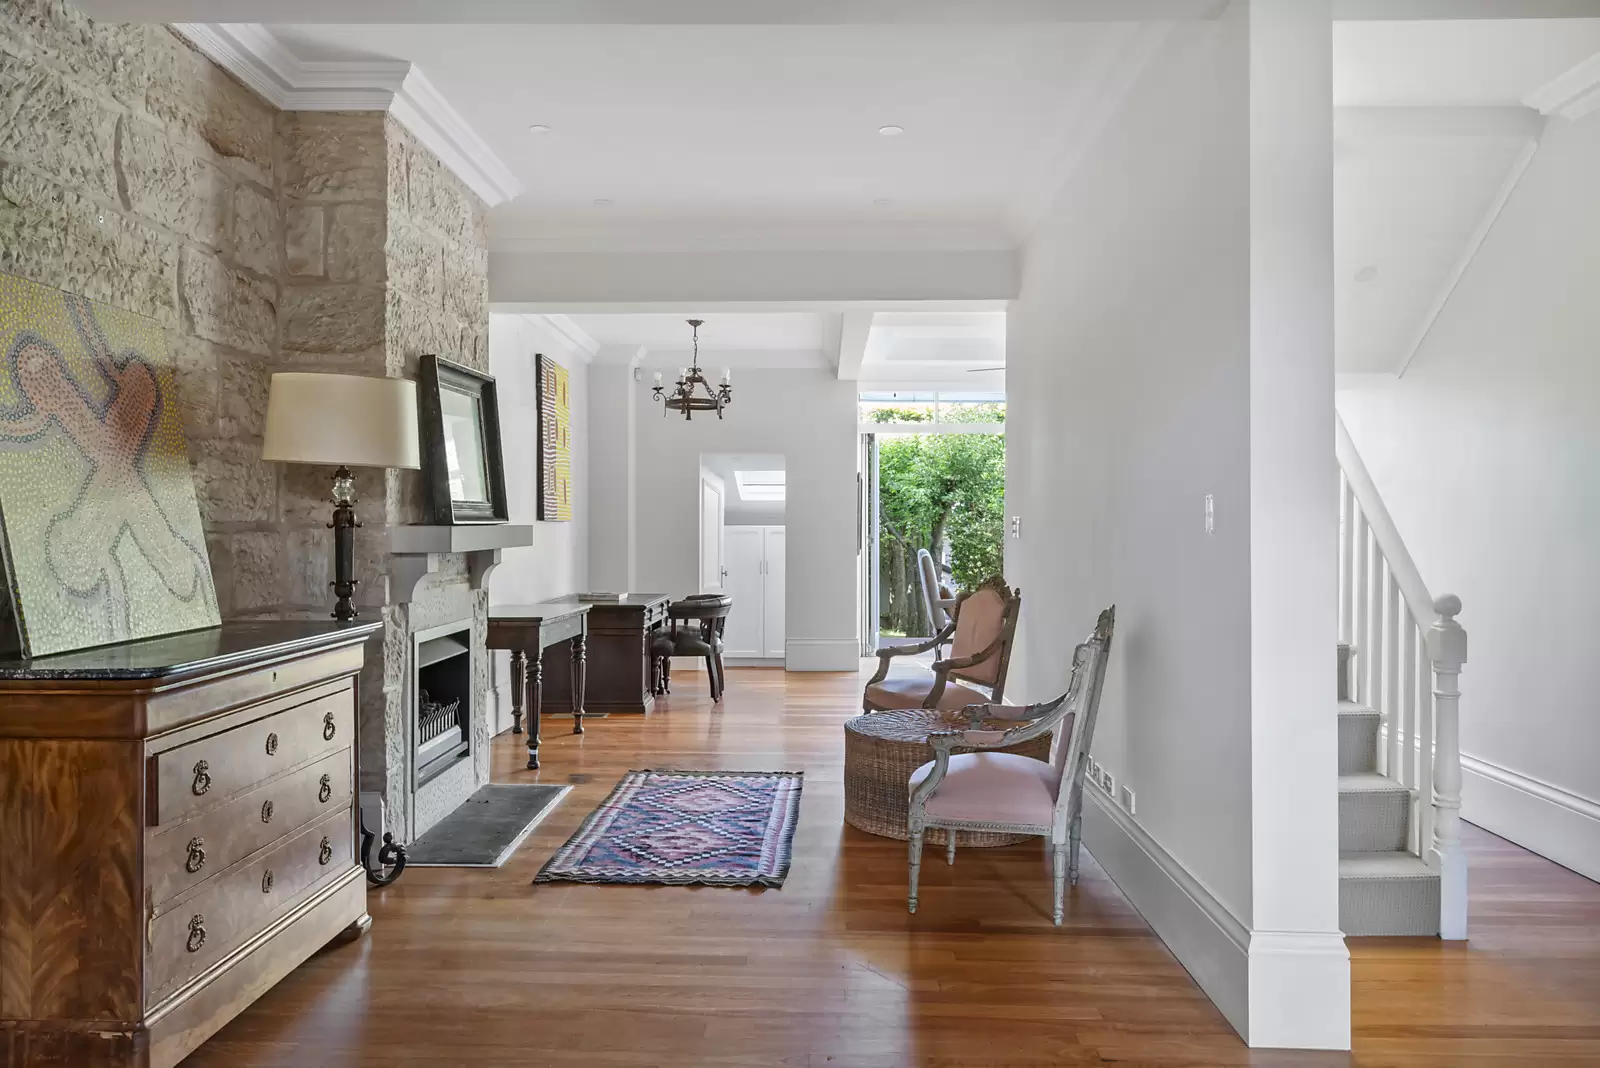 Photo #9: 198 Queen Street, Woollahra - Auction by Sydney Sotheby's International Realty